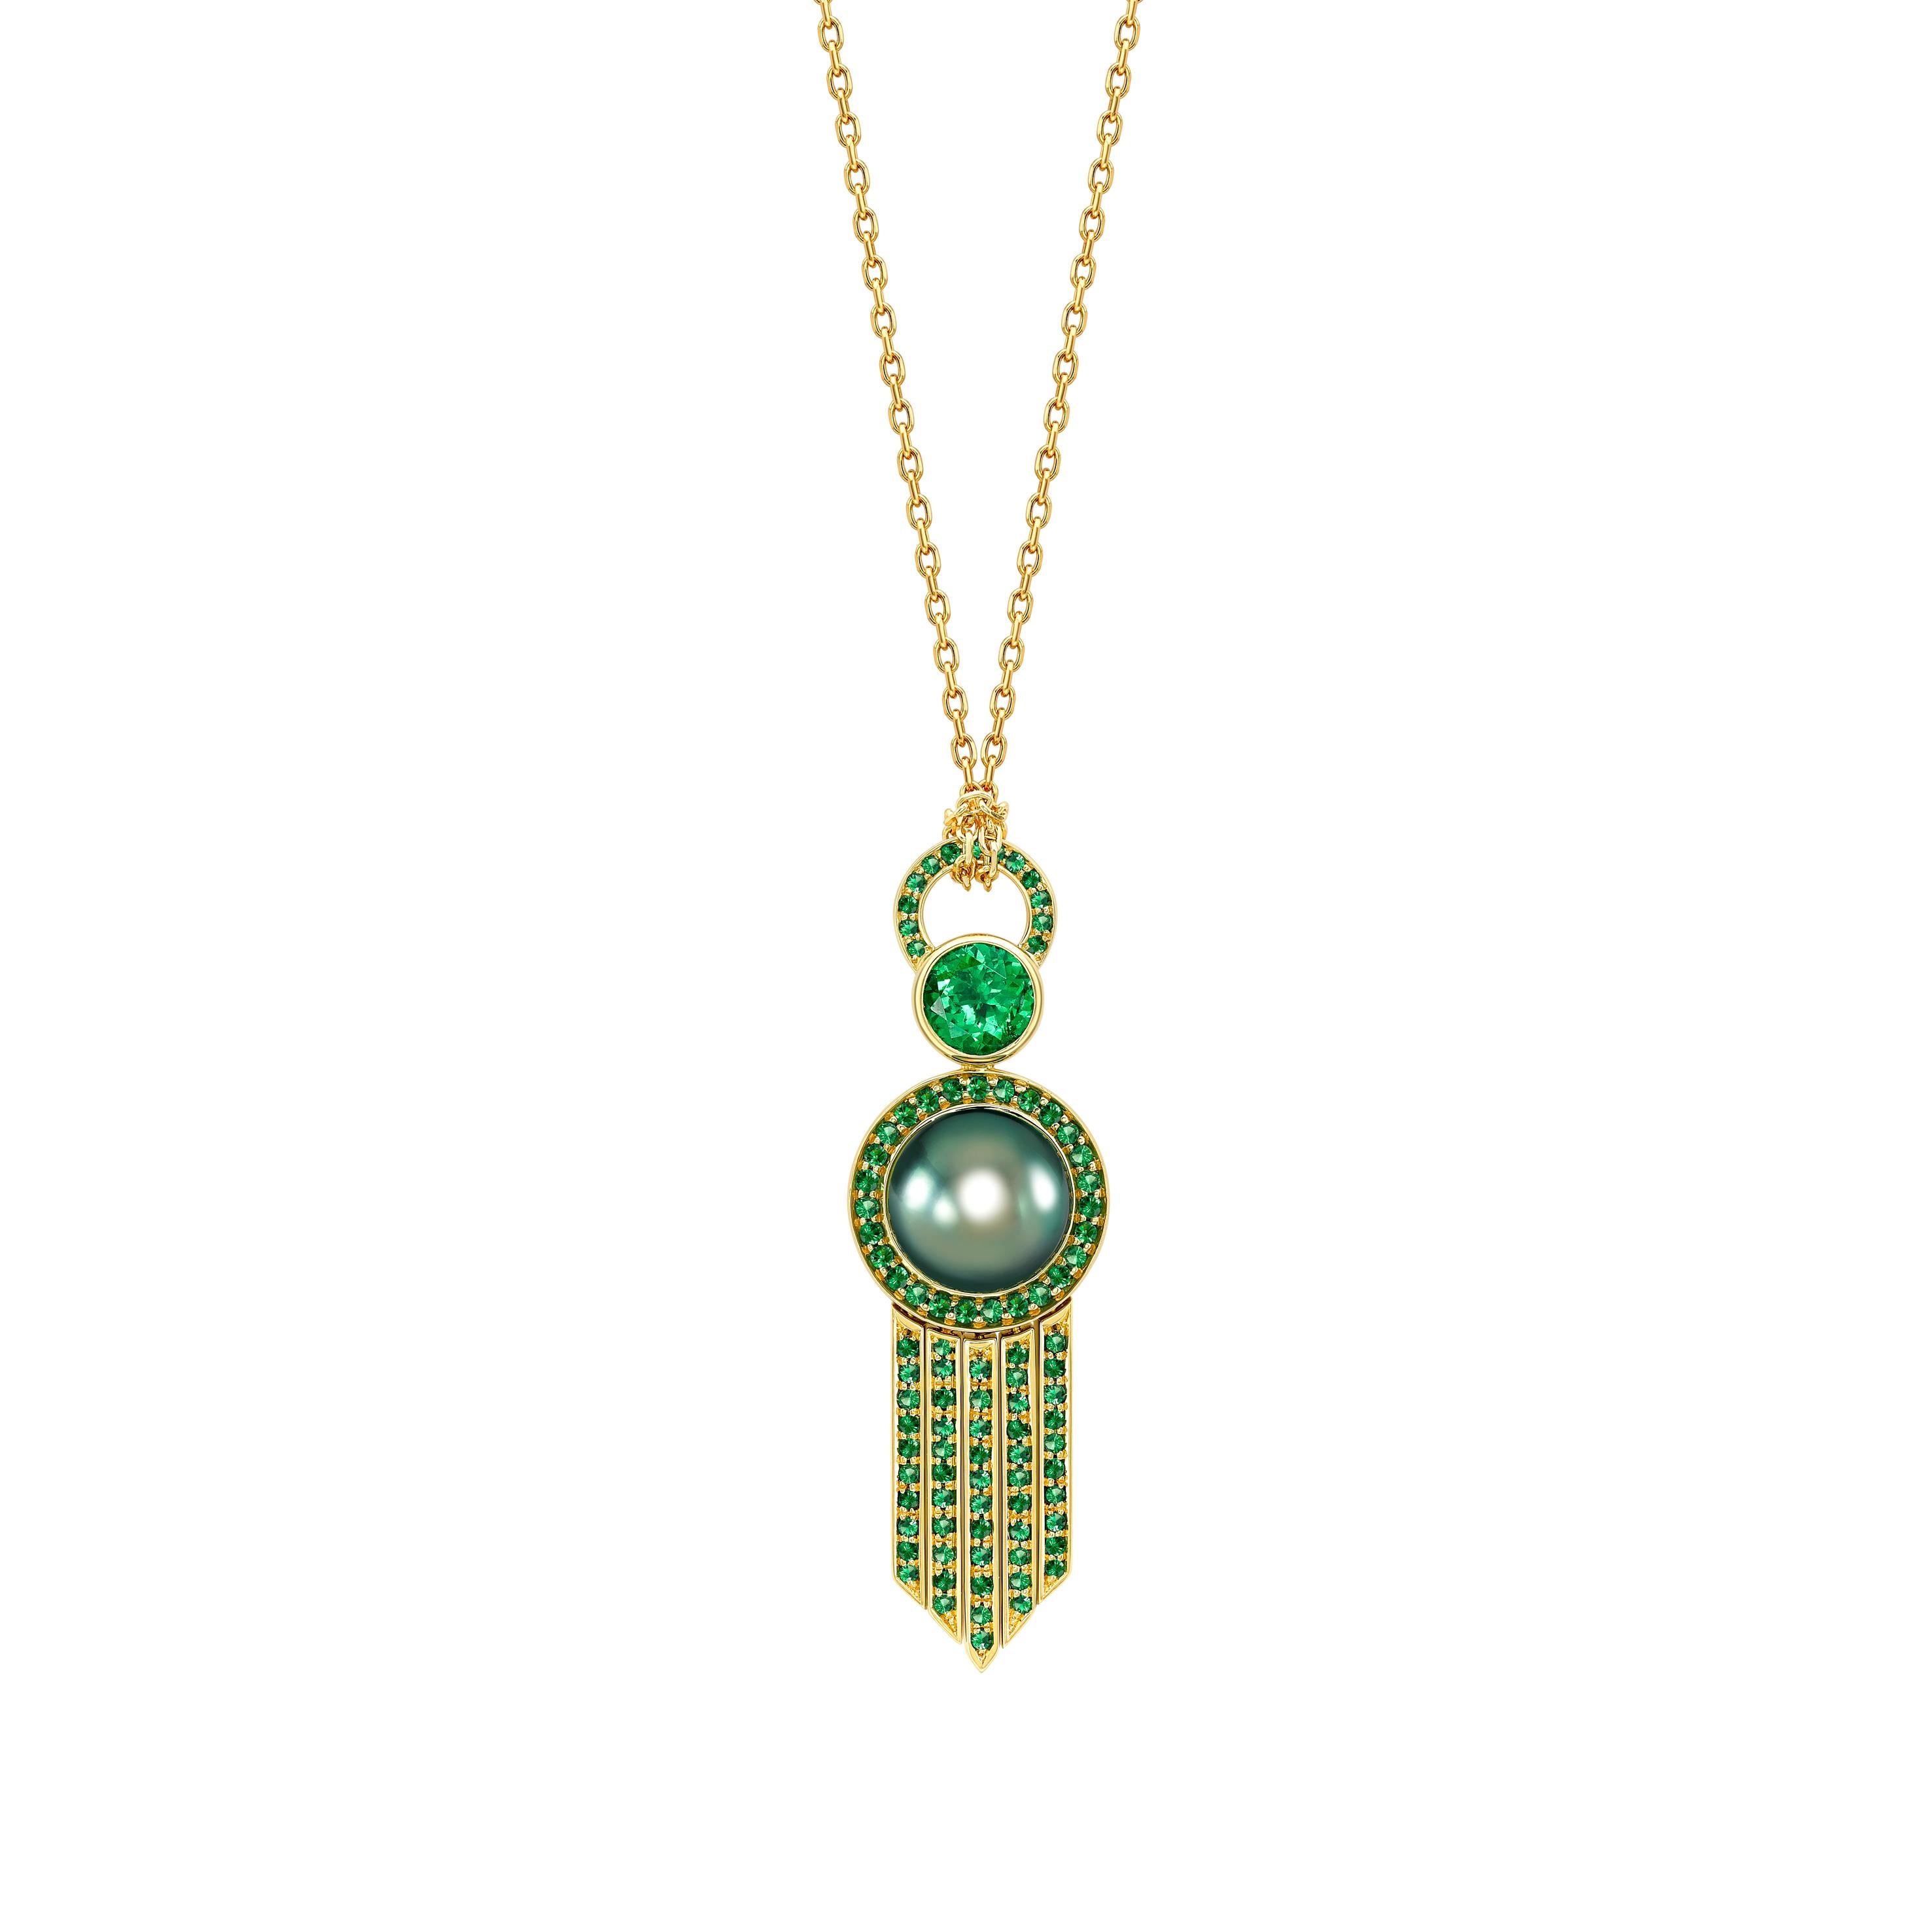 This beautiful set would be perfect to be worn together or as separate pieces and features the following pieces:

Pendant: 

The pendant has been handcrafted in 18ct yellow gold and is a unique one of a kind piece. The large natural tsavorite weighs